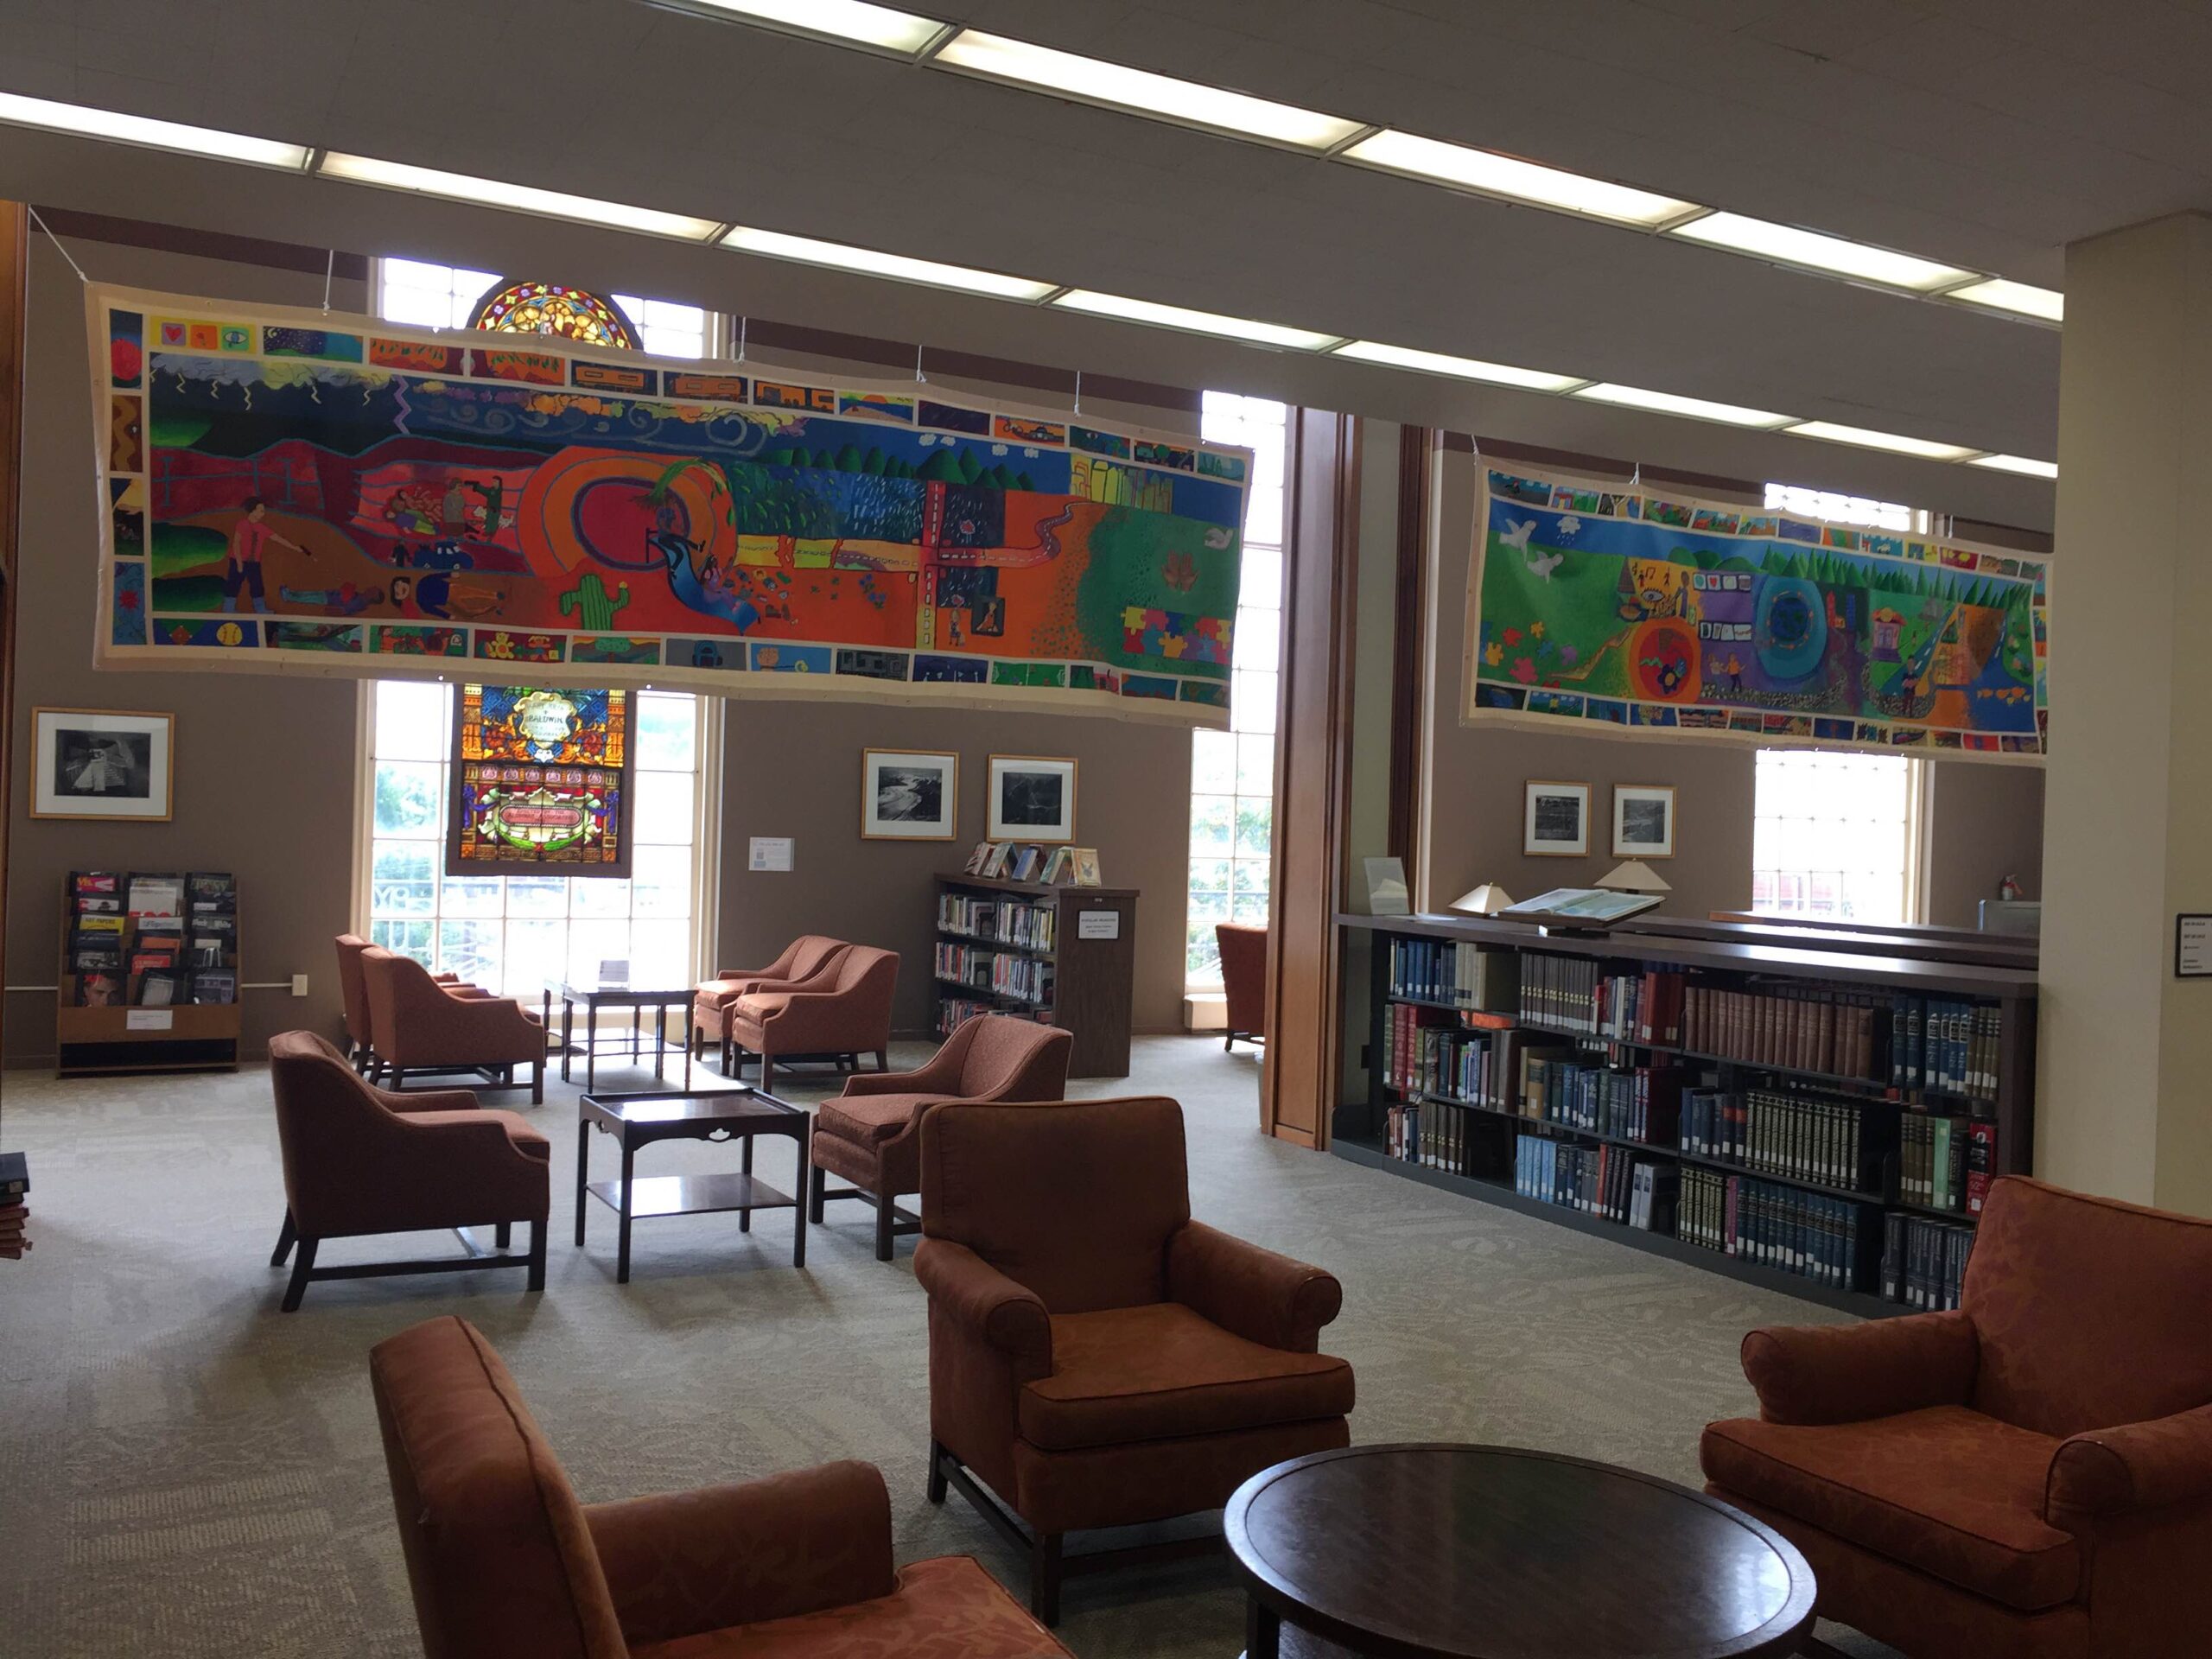 May Term Murals on Display in Grafton Library